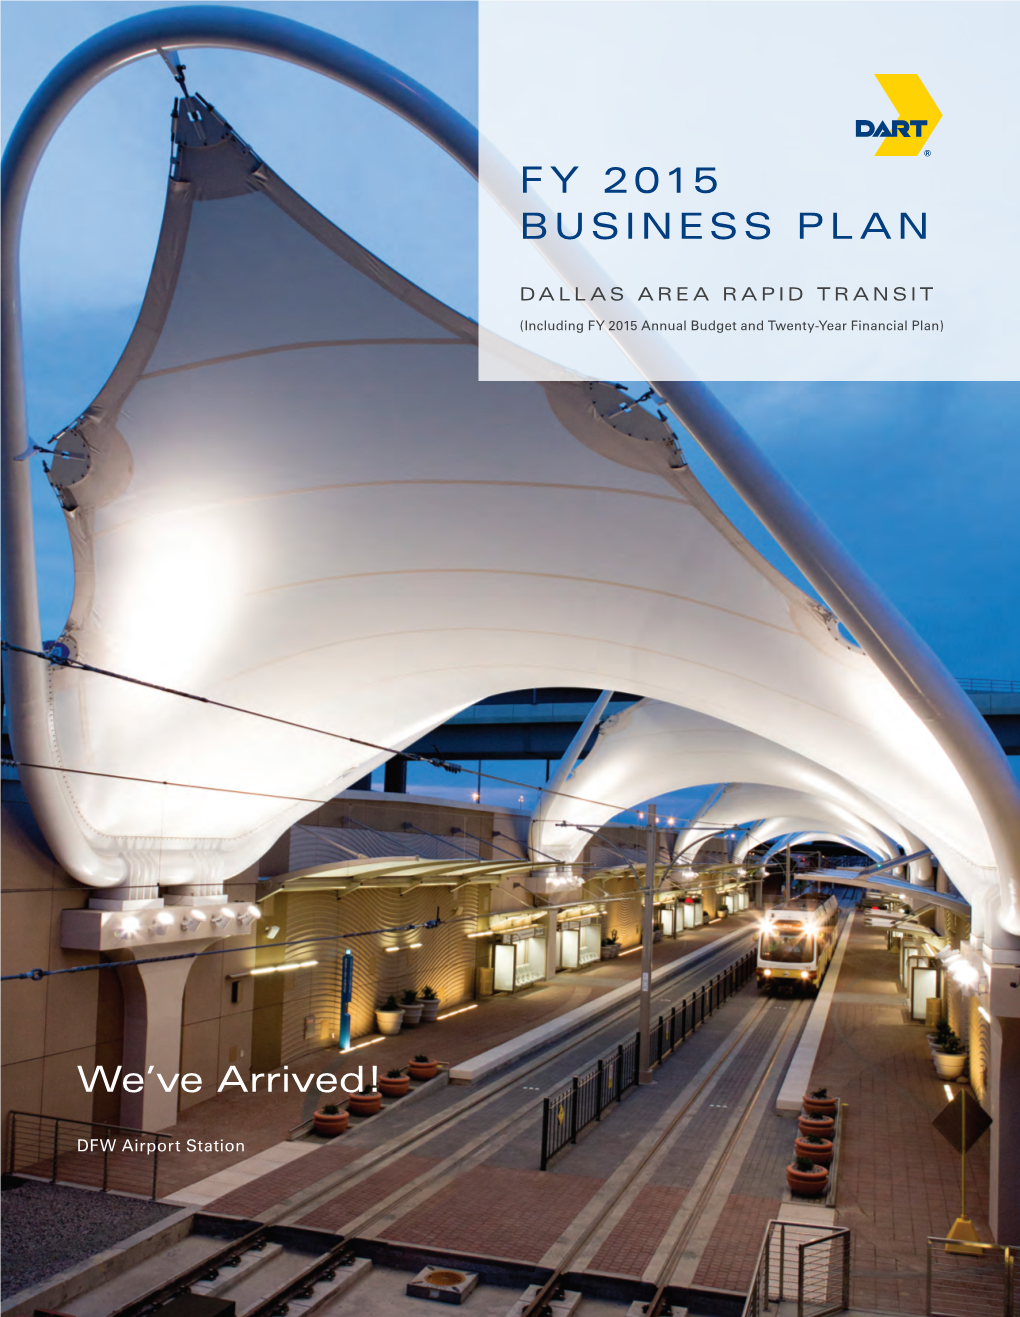 FY 2015 Business Plan (Including FY 2015 Annual Budget and FY 2015 Twenty-Year Financial Plan)